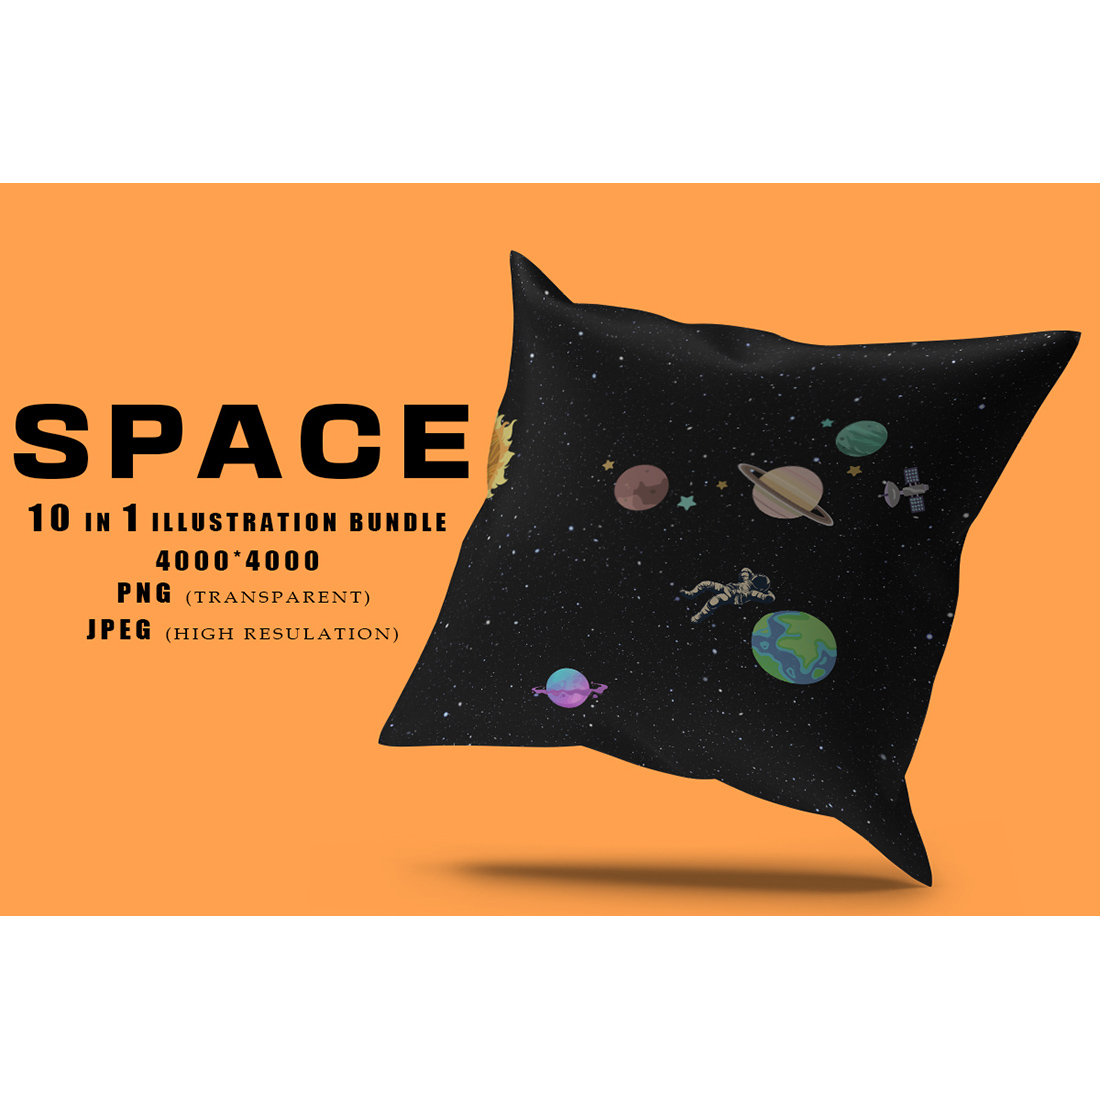 Cushion image with exquisite print on the theme of space